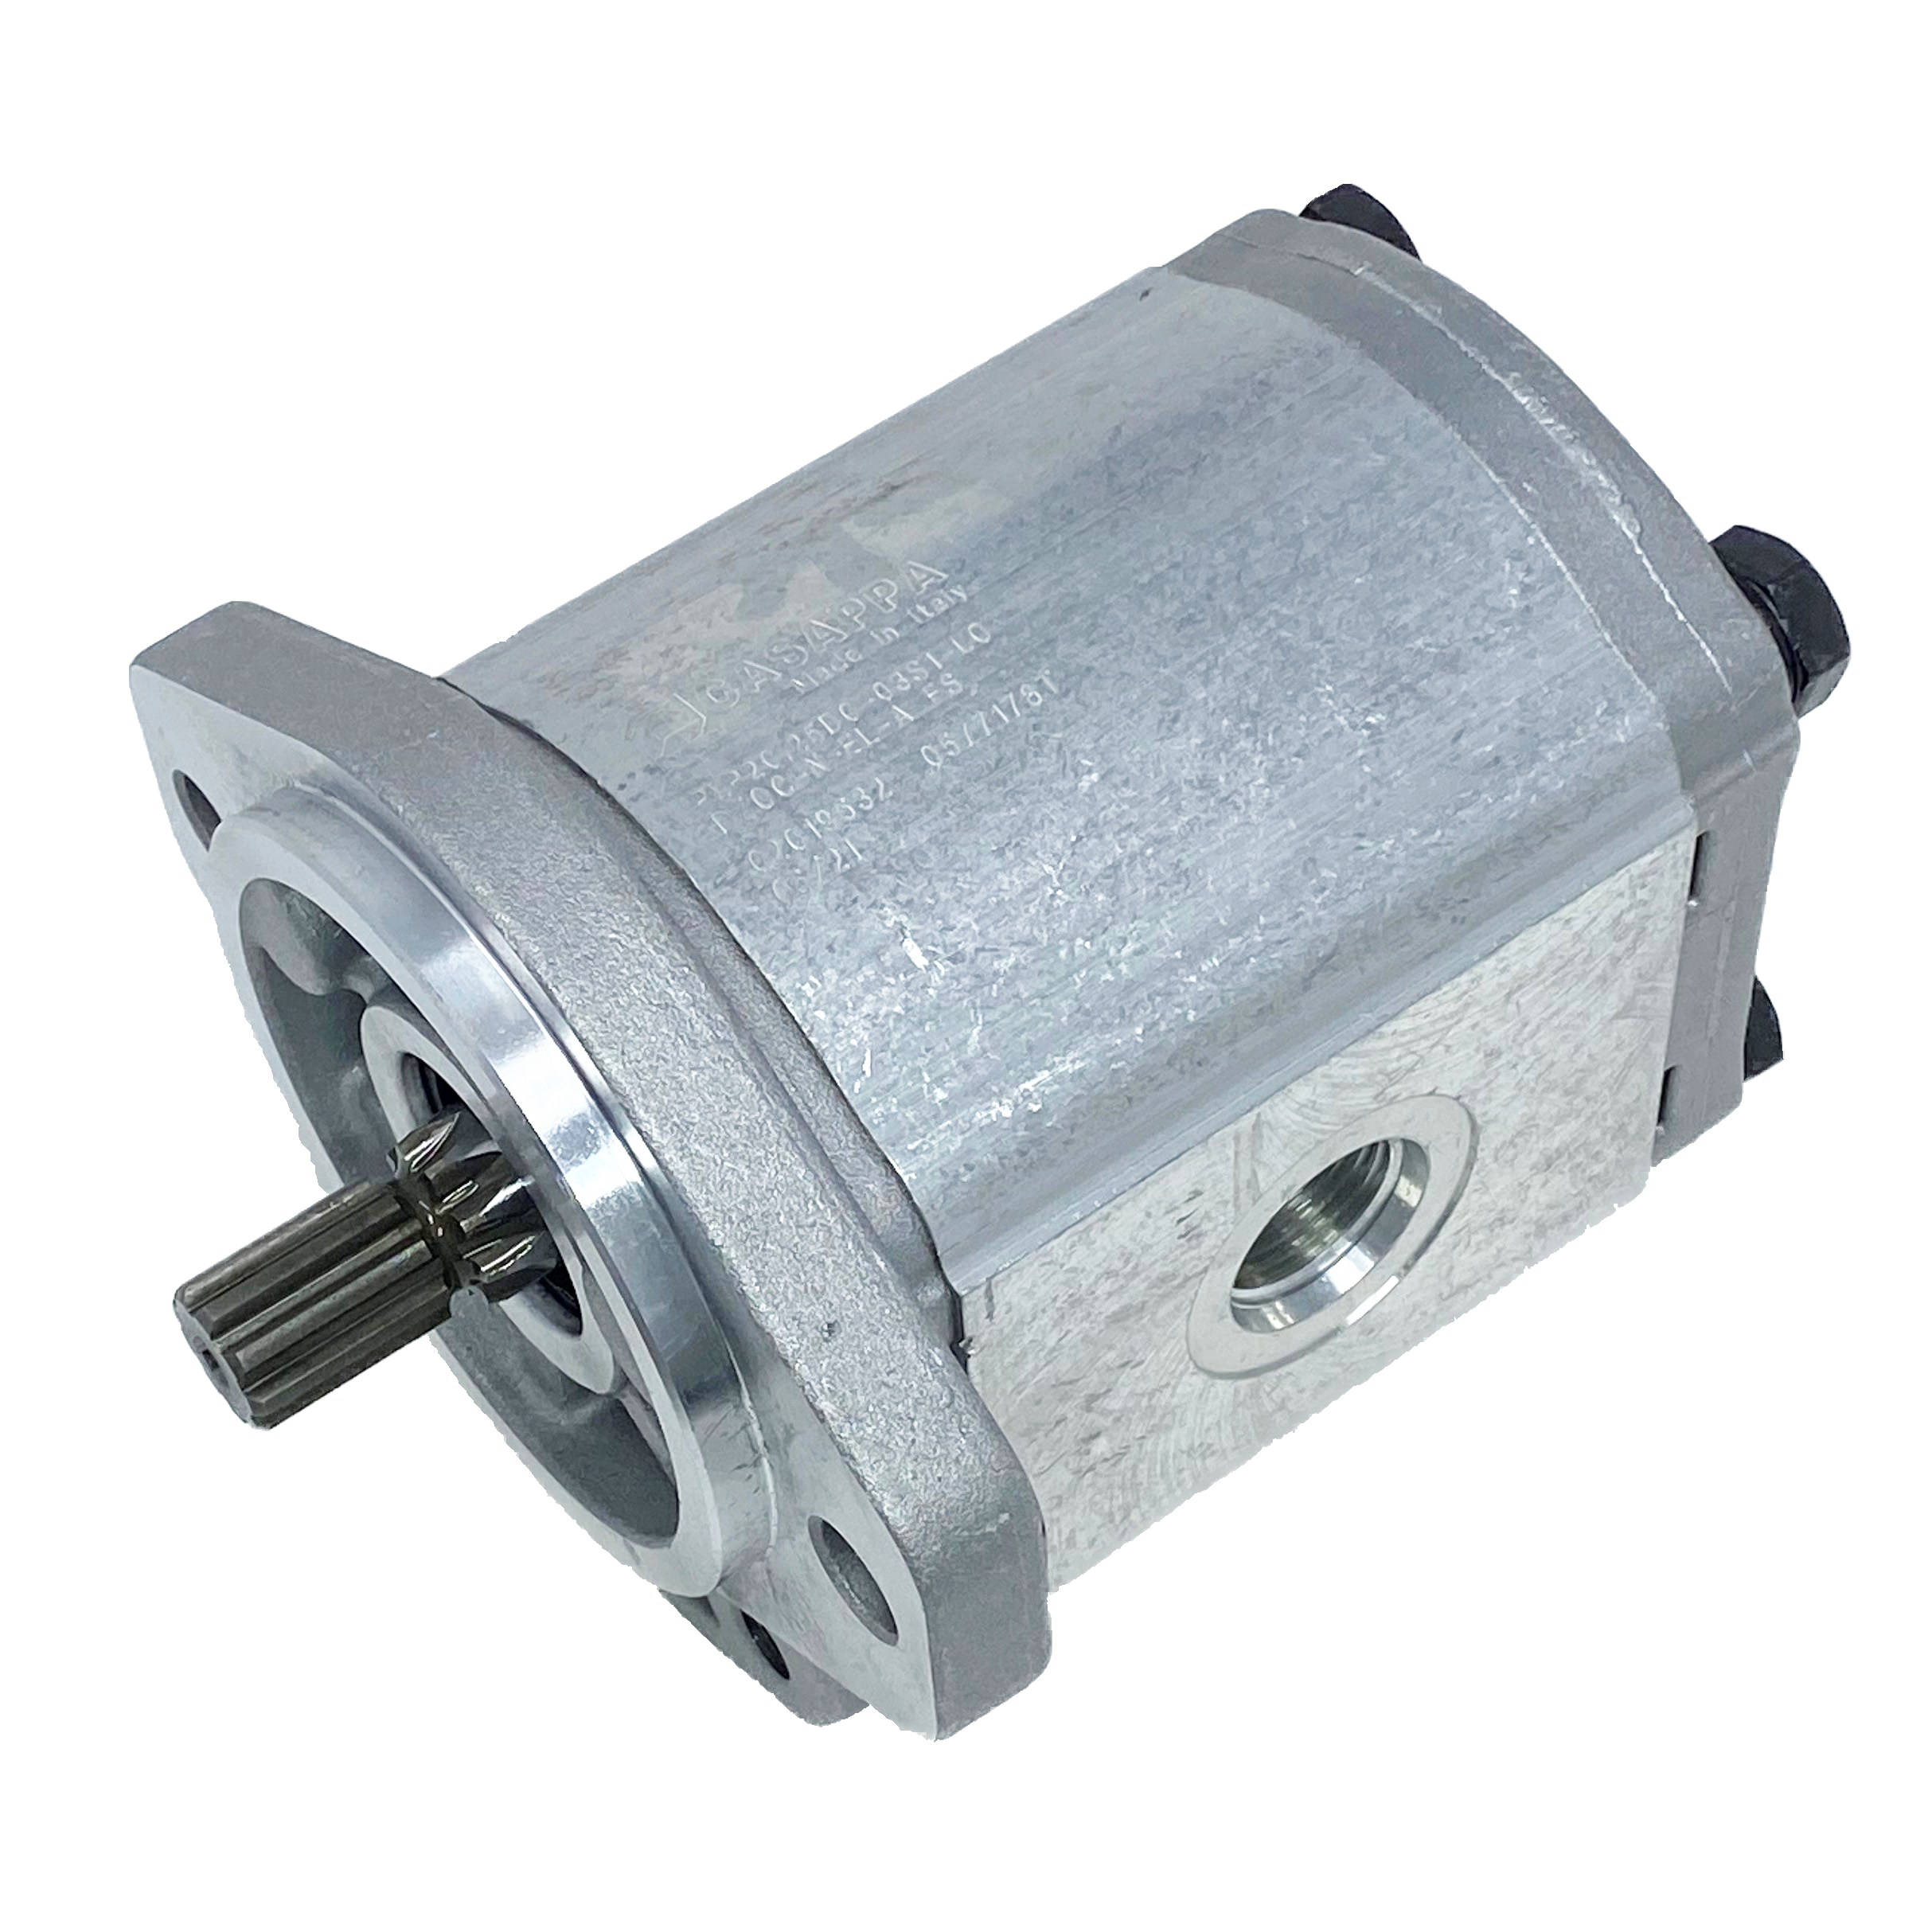 PHP20.25S0-07S9-LOG/OC-N-EL : Casappa Polaris Gear Pump, 26.42cc, 3335psi Rated, 3000RPM, CCW, 11T 16/32dp Shaft, SAE A 2-Bolt Flange, 1.25" #20 SAE Inlet, 0.625 (5/8") #10 SAE Outlet, Cast Iron Body, Aluminum Flange